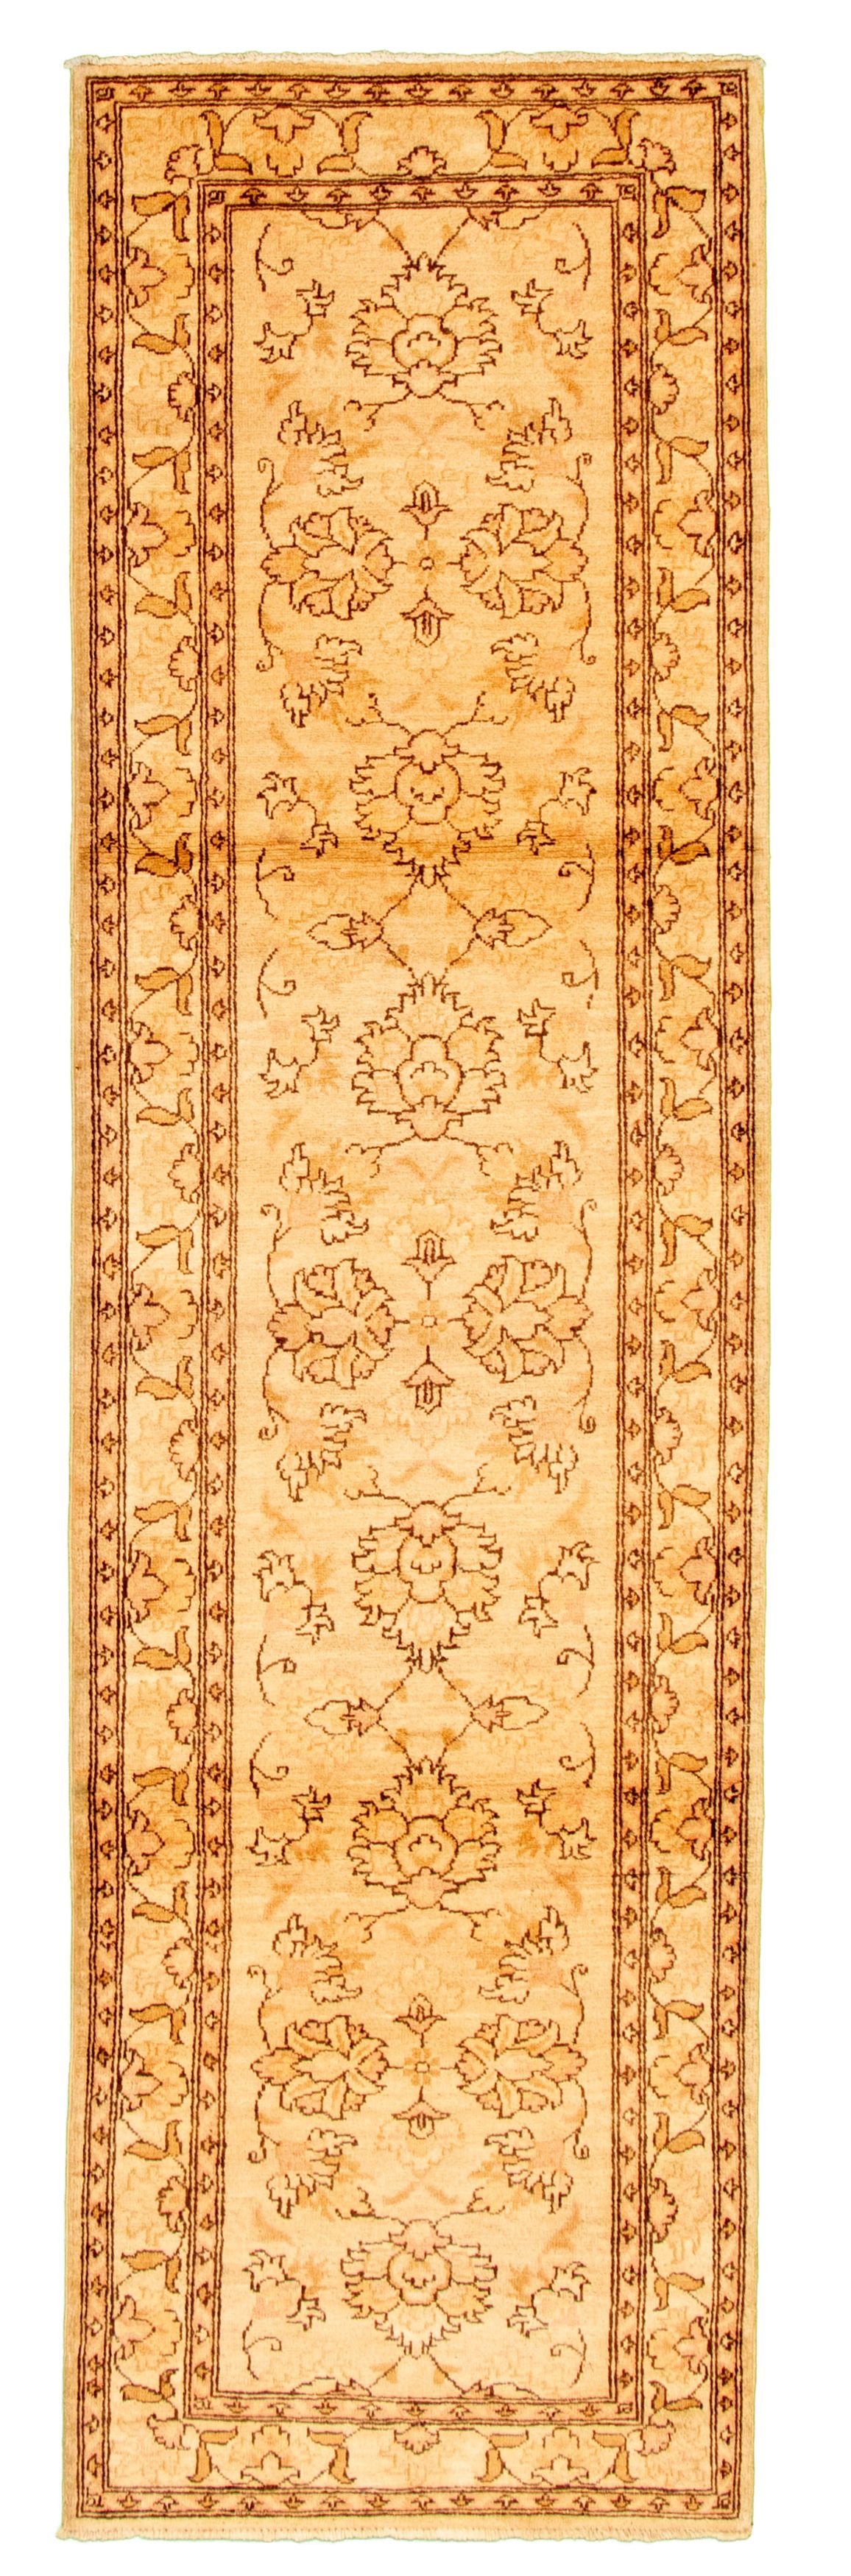 Hand-knotted Chobi Finest Ivory Wool Rug 2'9" x 9'7" Size: 2'9" x 9'7"  